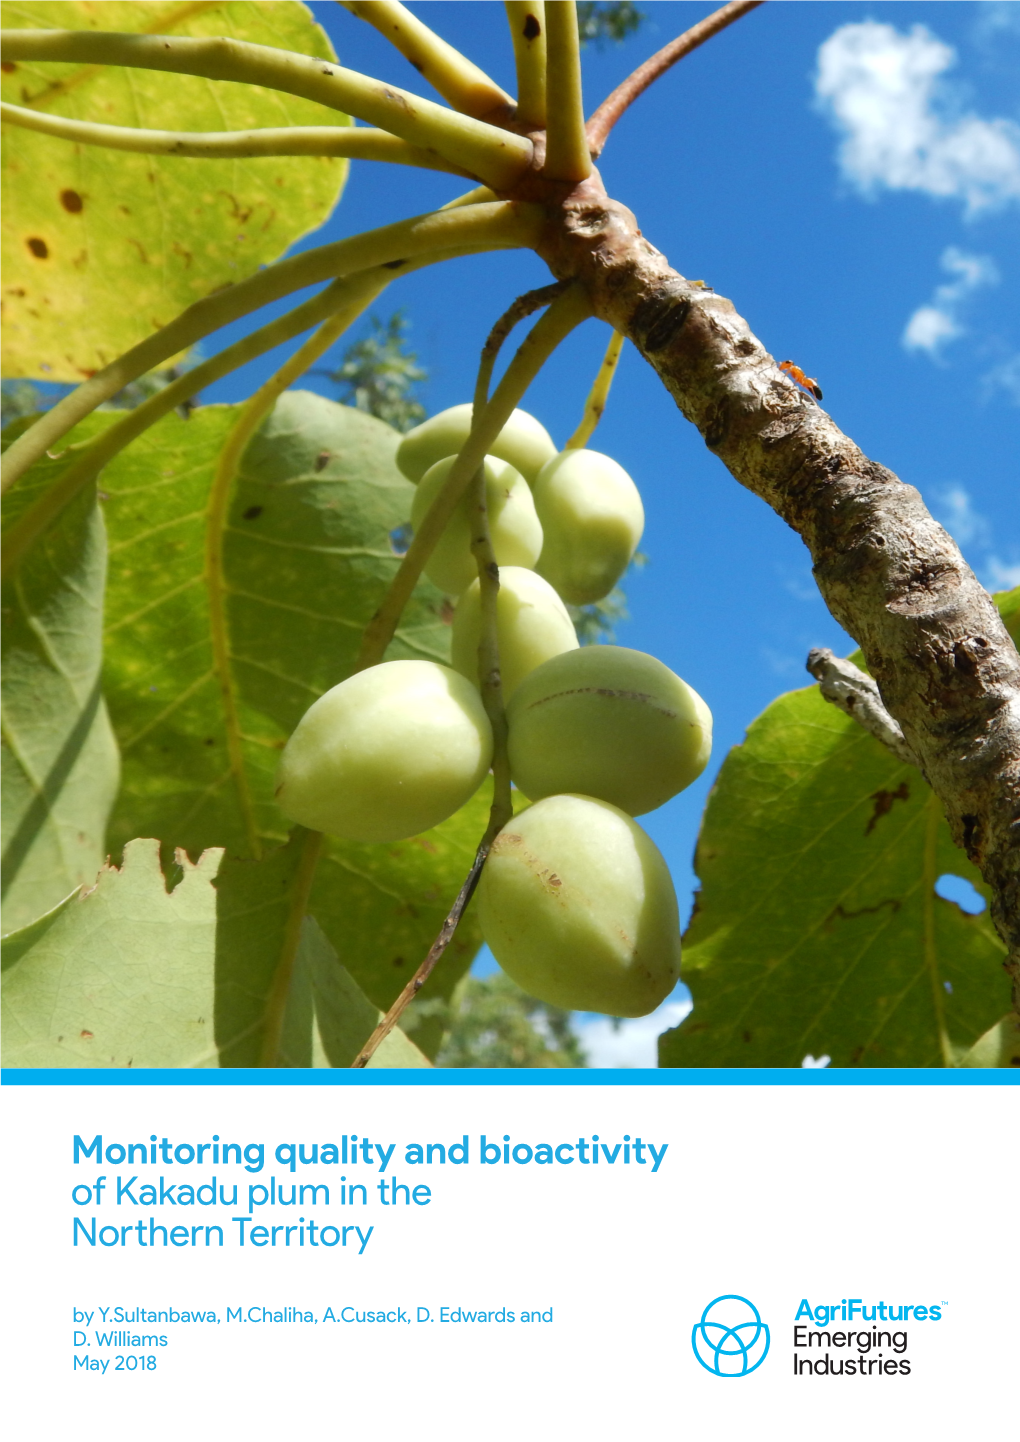 Monitoring Quality and Bioactivity of Kakadu Plum in the Northern Territory by Y.Sultanbawa, M.Chaliha, A.Cusack, D